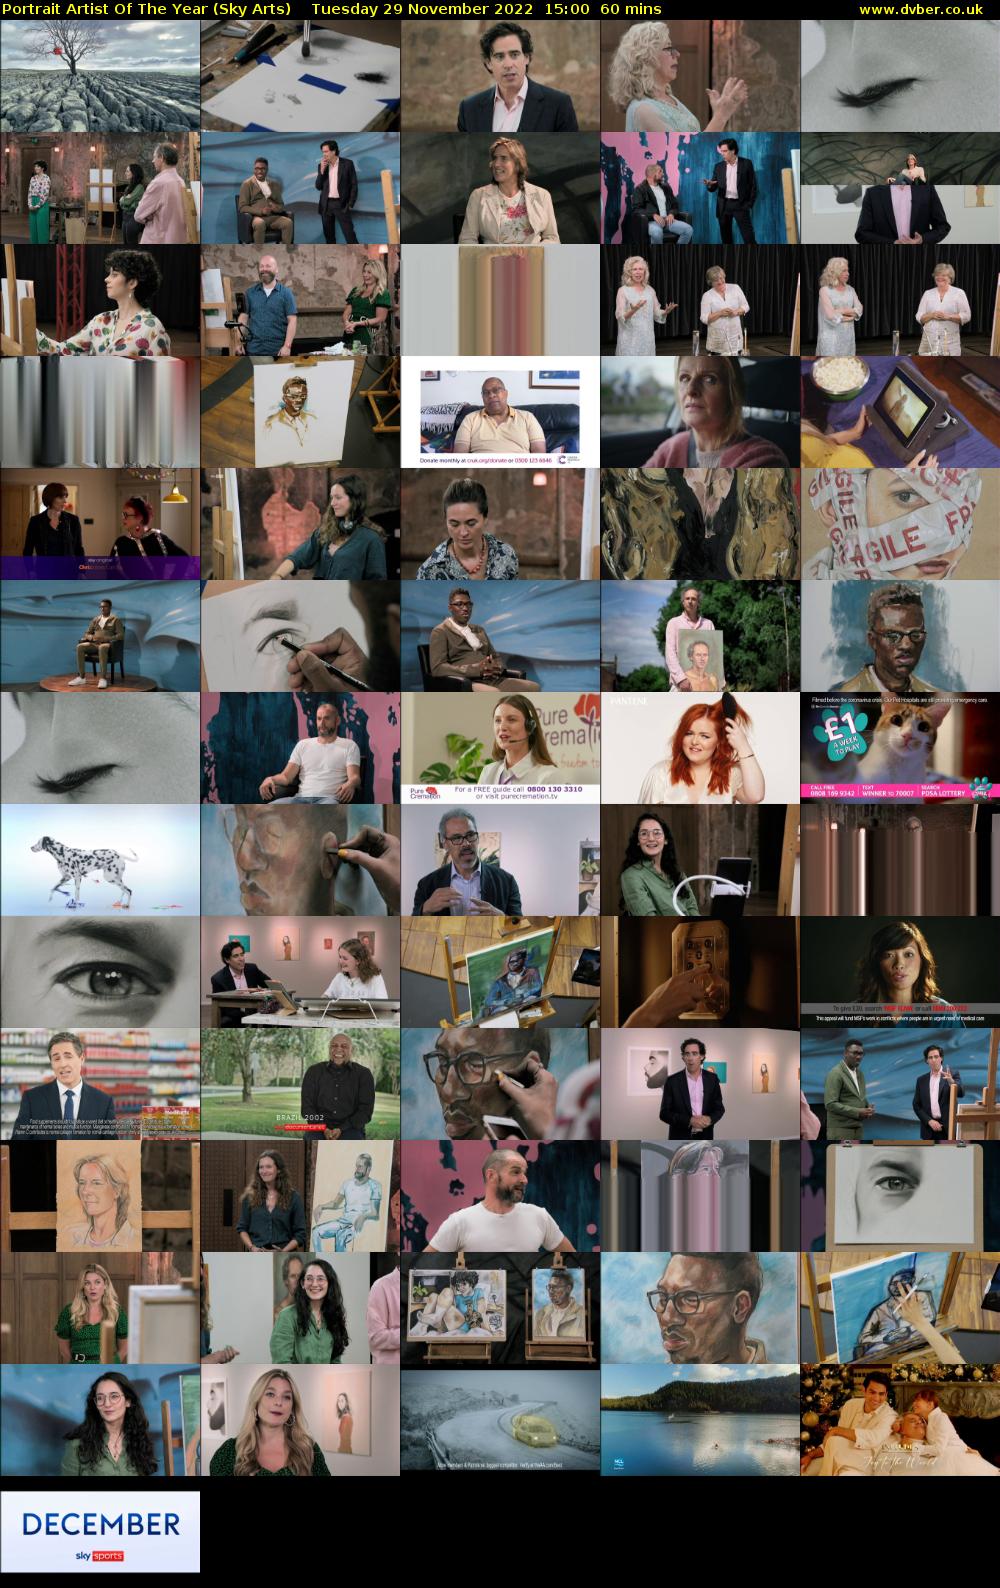 Portrait Artist Of The Year (Sky Arts) Tuesday 29 November 2022 15:00 - 16:00